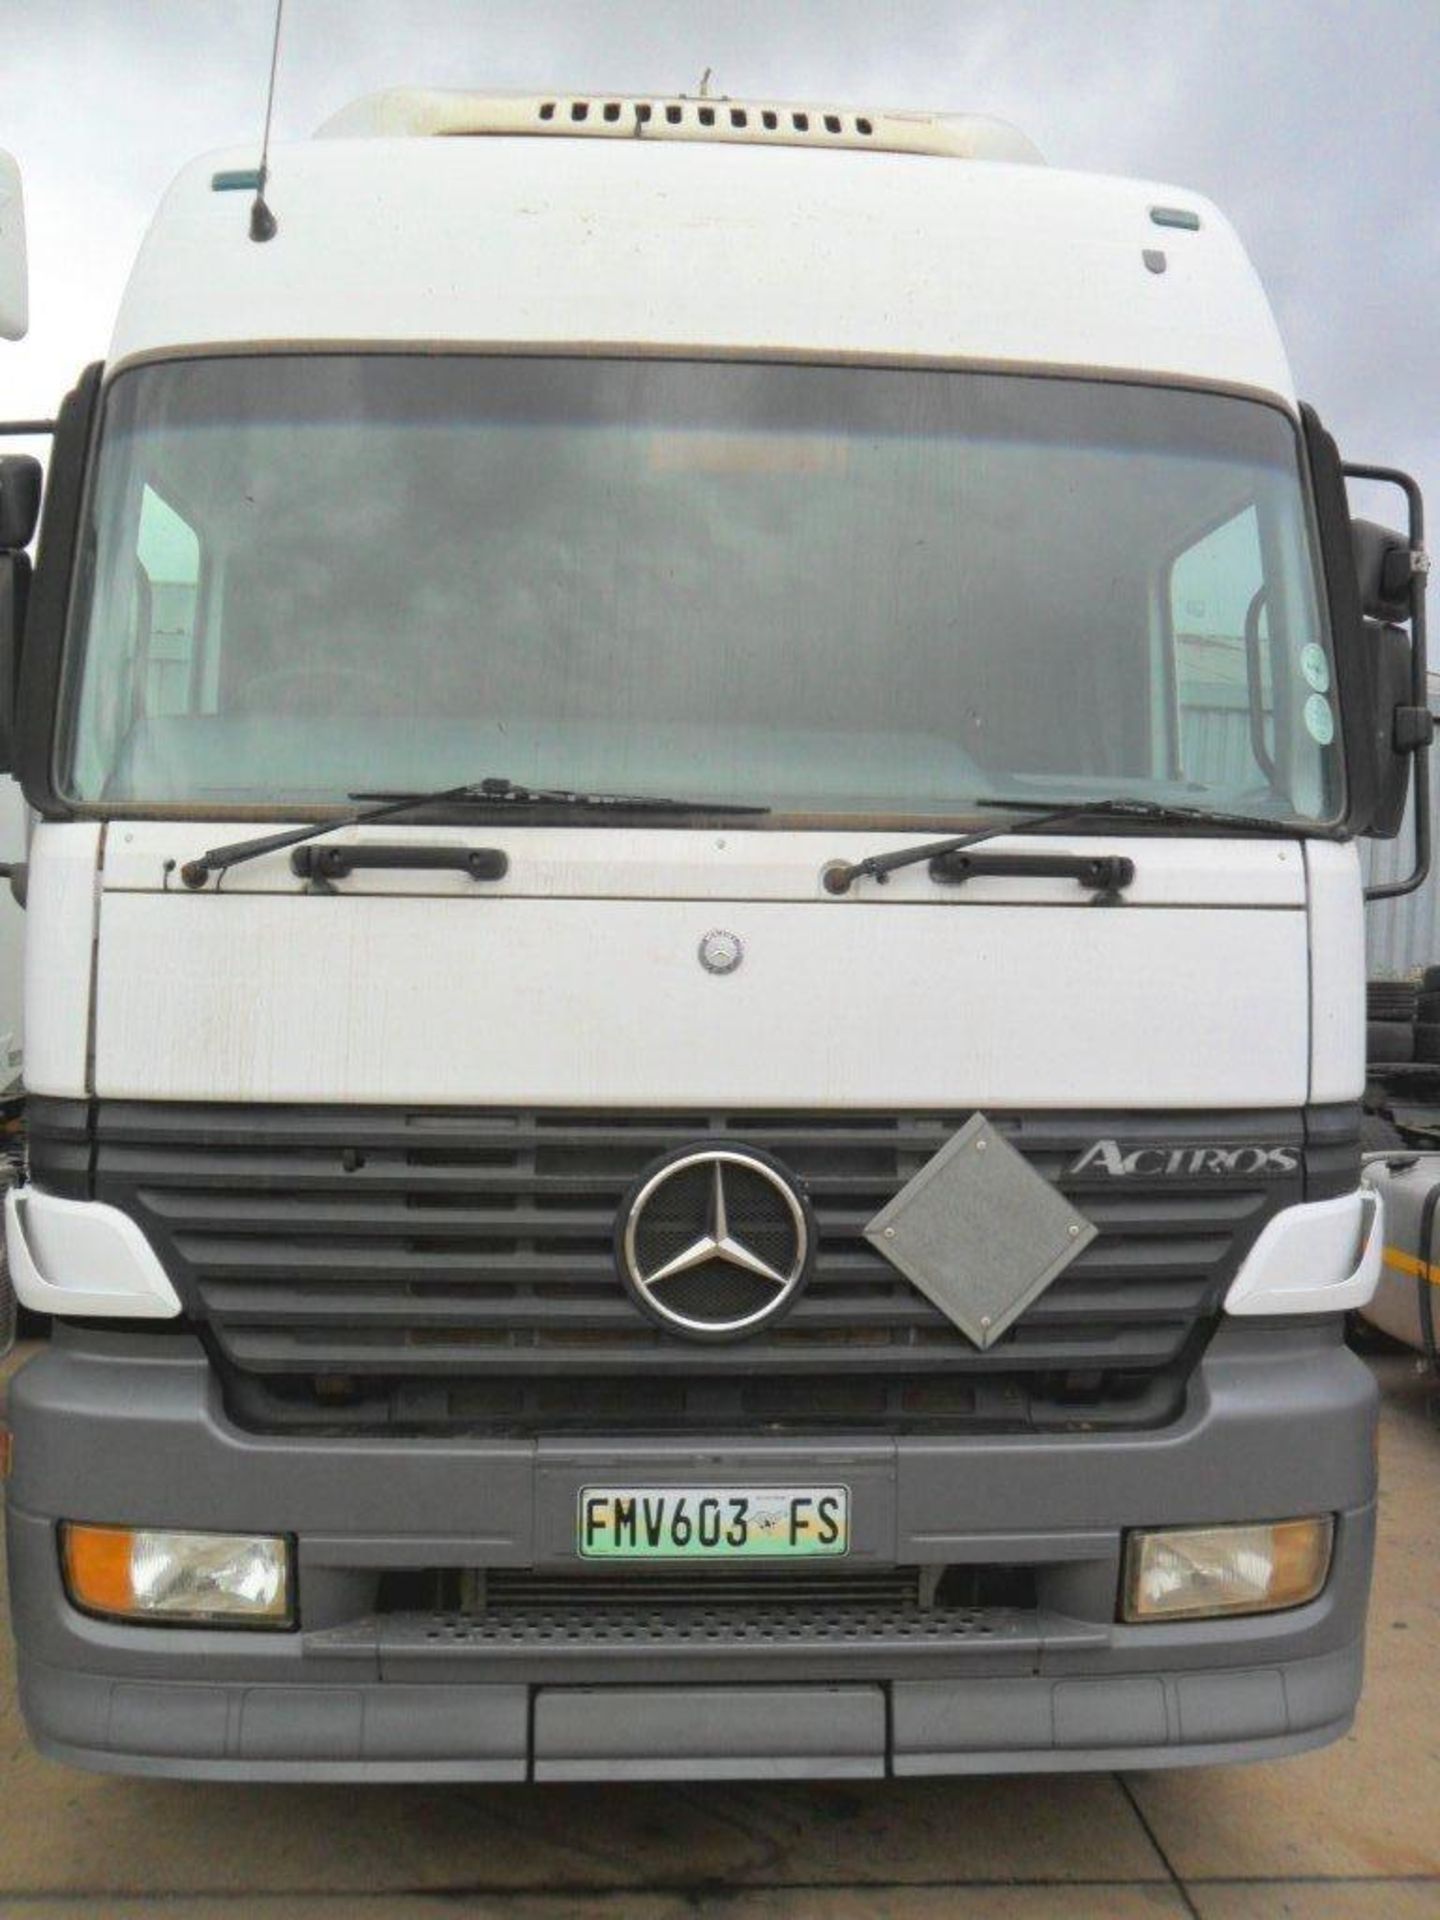 2003 M/BENZ ACTROS 2648 6X4 T/T - REG NO: FMV603FS - (ITEM TO BE SOLD SUBJECT TO CONFIRMATION) - Image 9 of 10